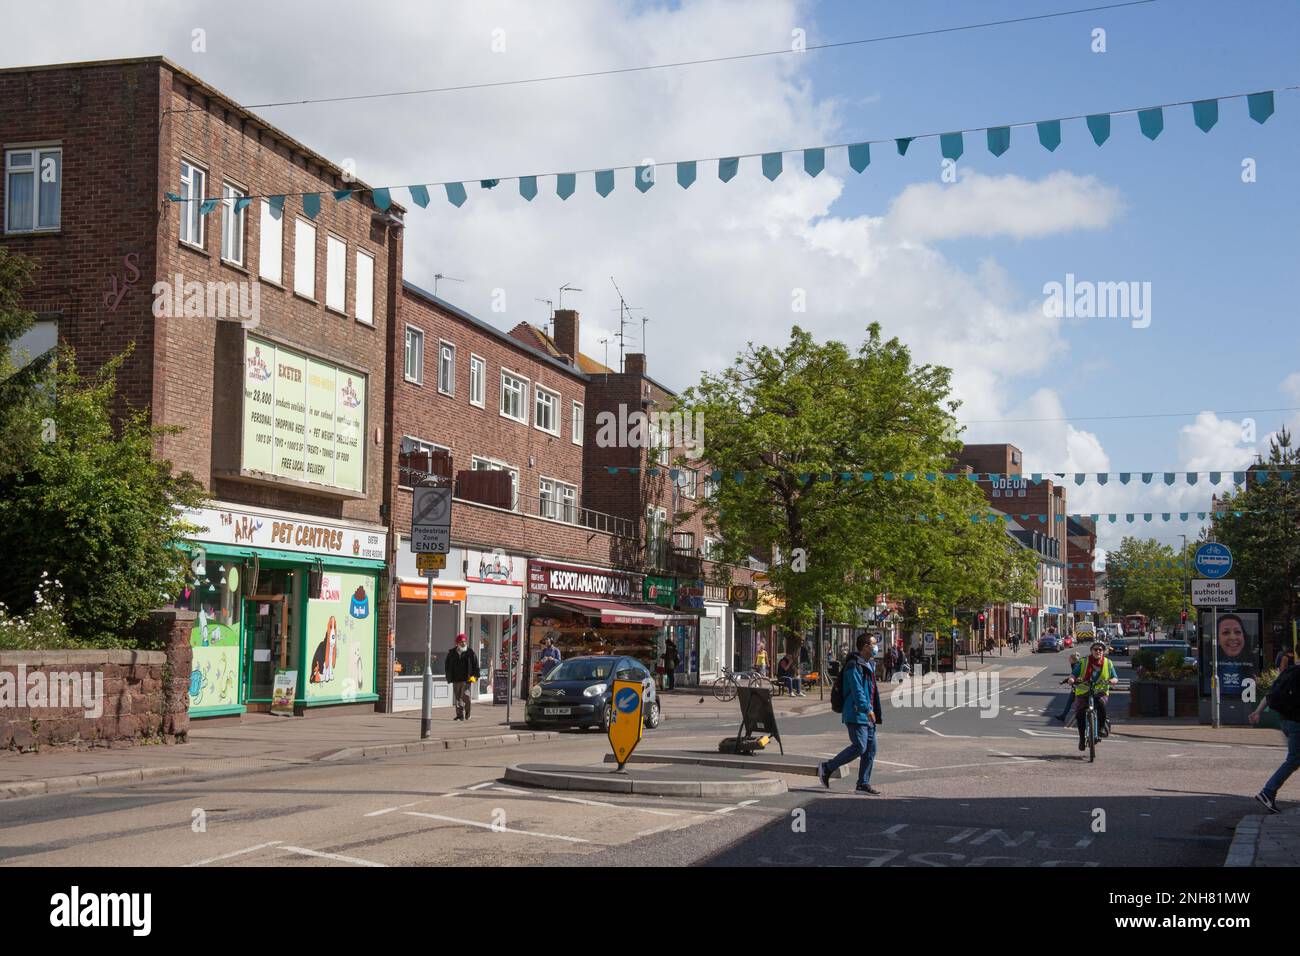 Views of the High Street in Exeter, Devon in the UK Stock Photo